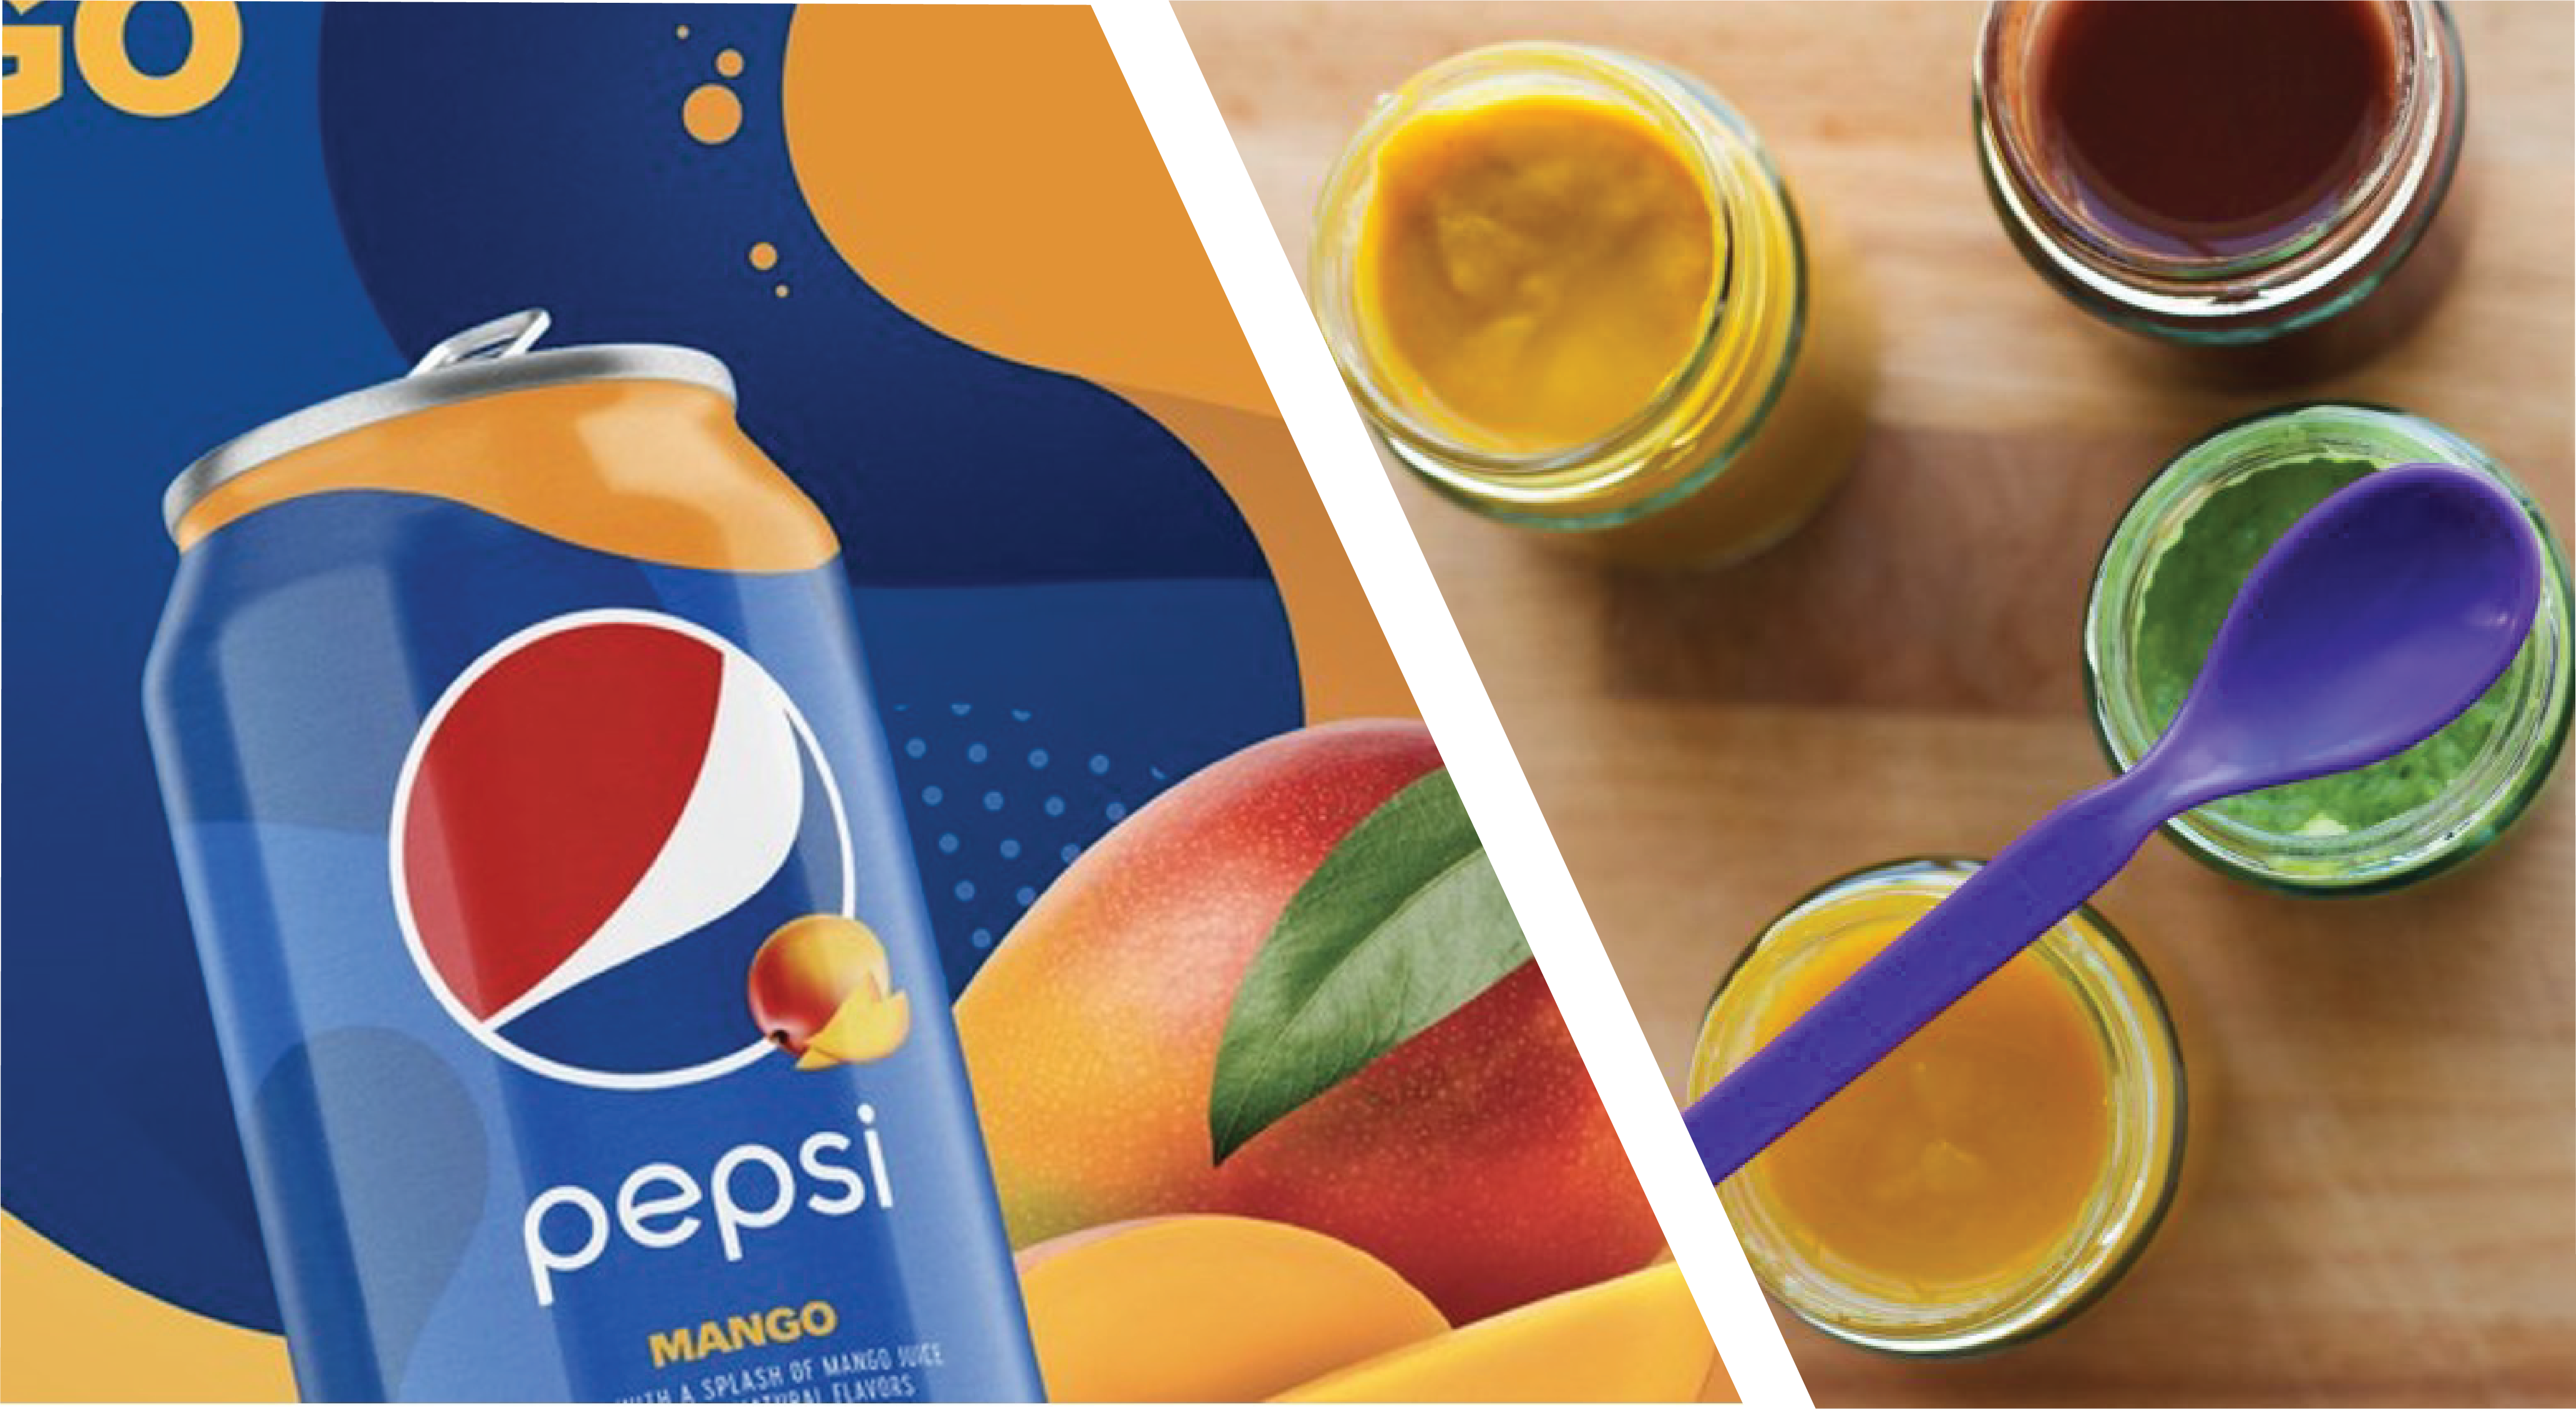 Baby Food Safety Act and Mango Pepsi